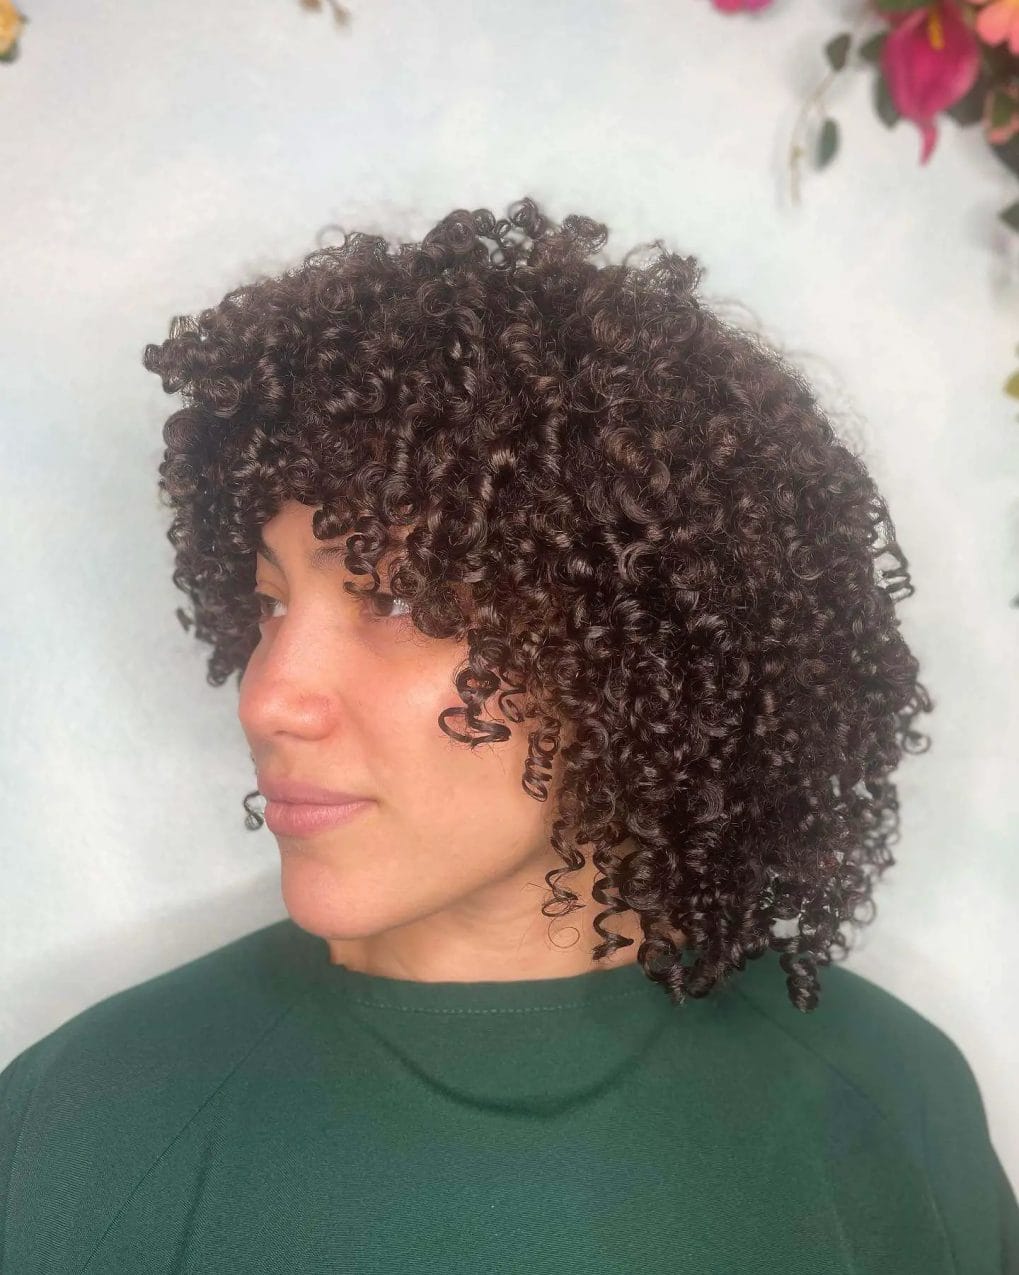 Chic curly cut with defined curls and dark chocolate hue.
